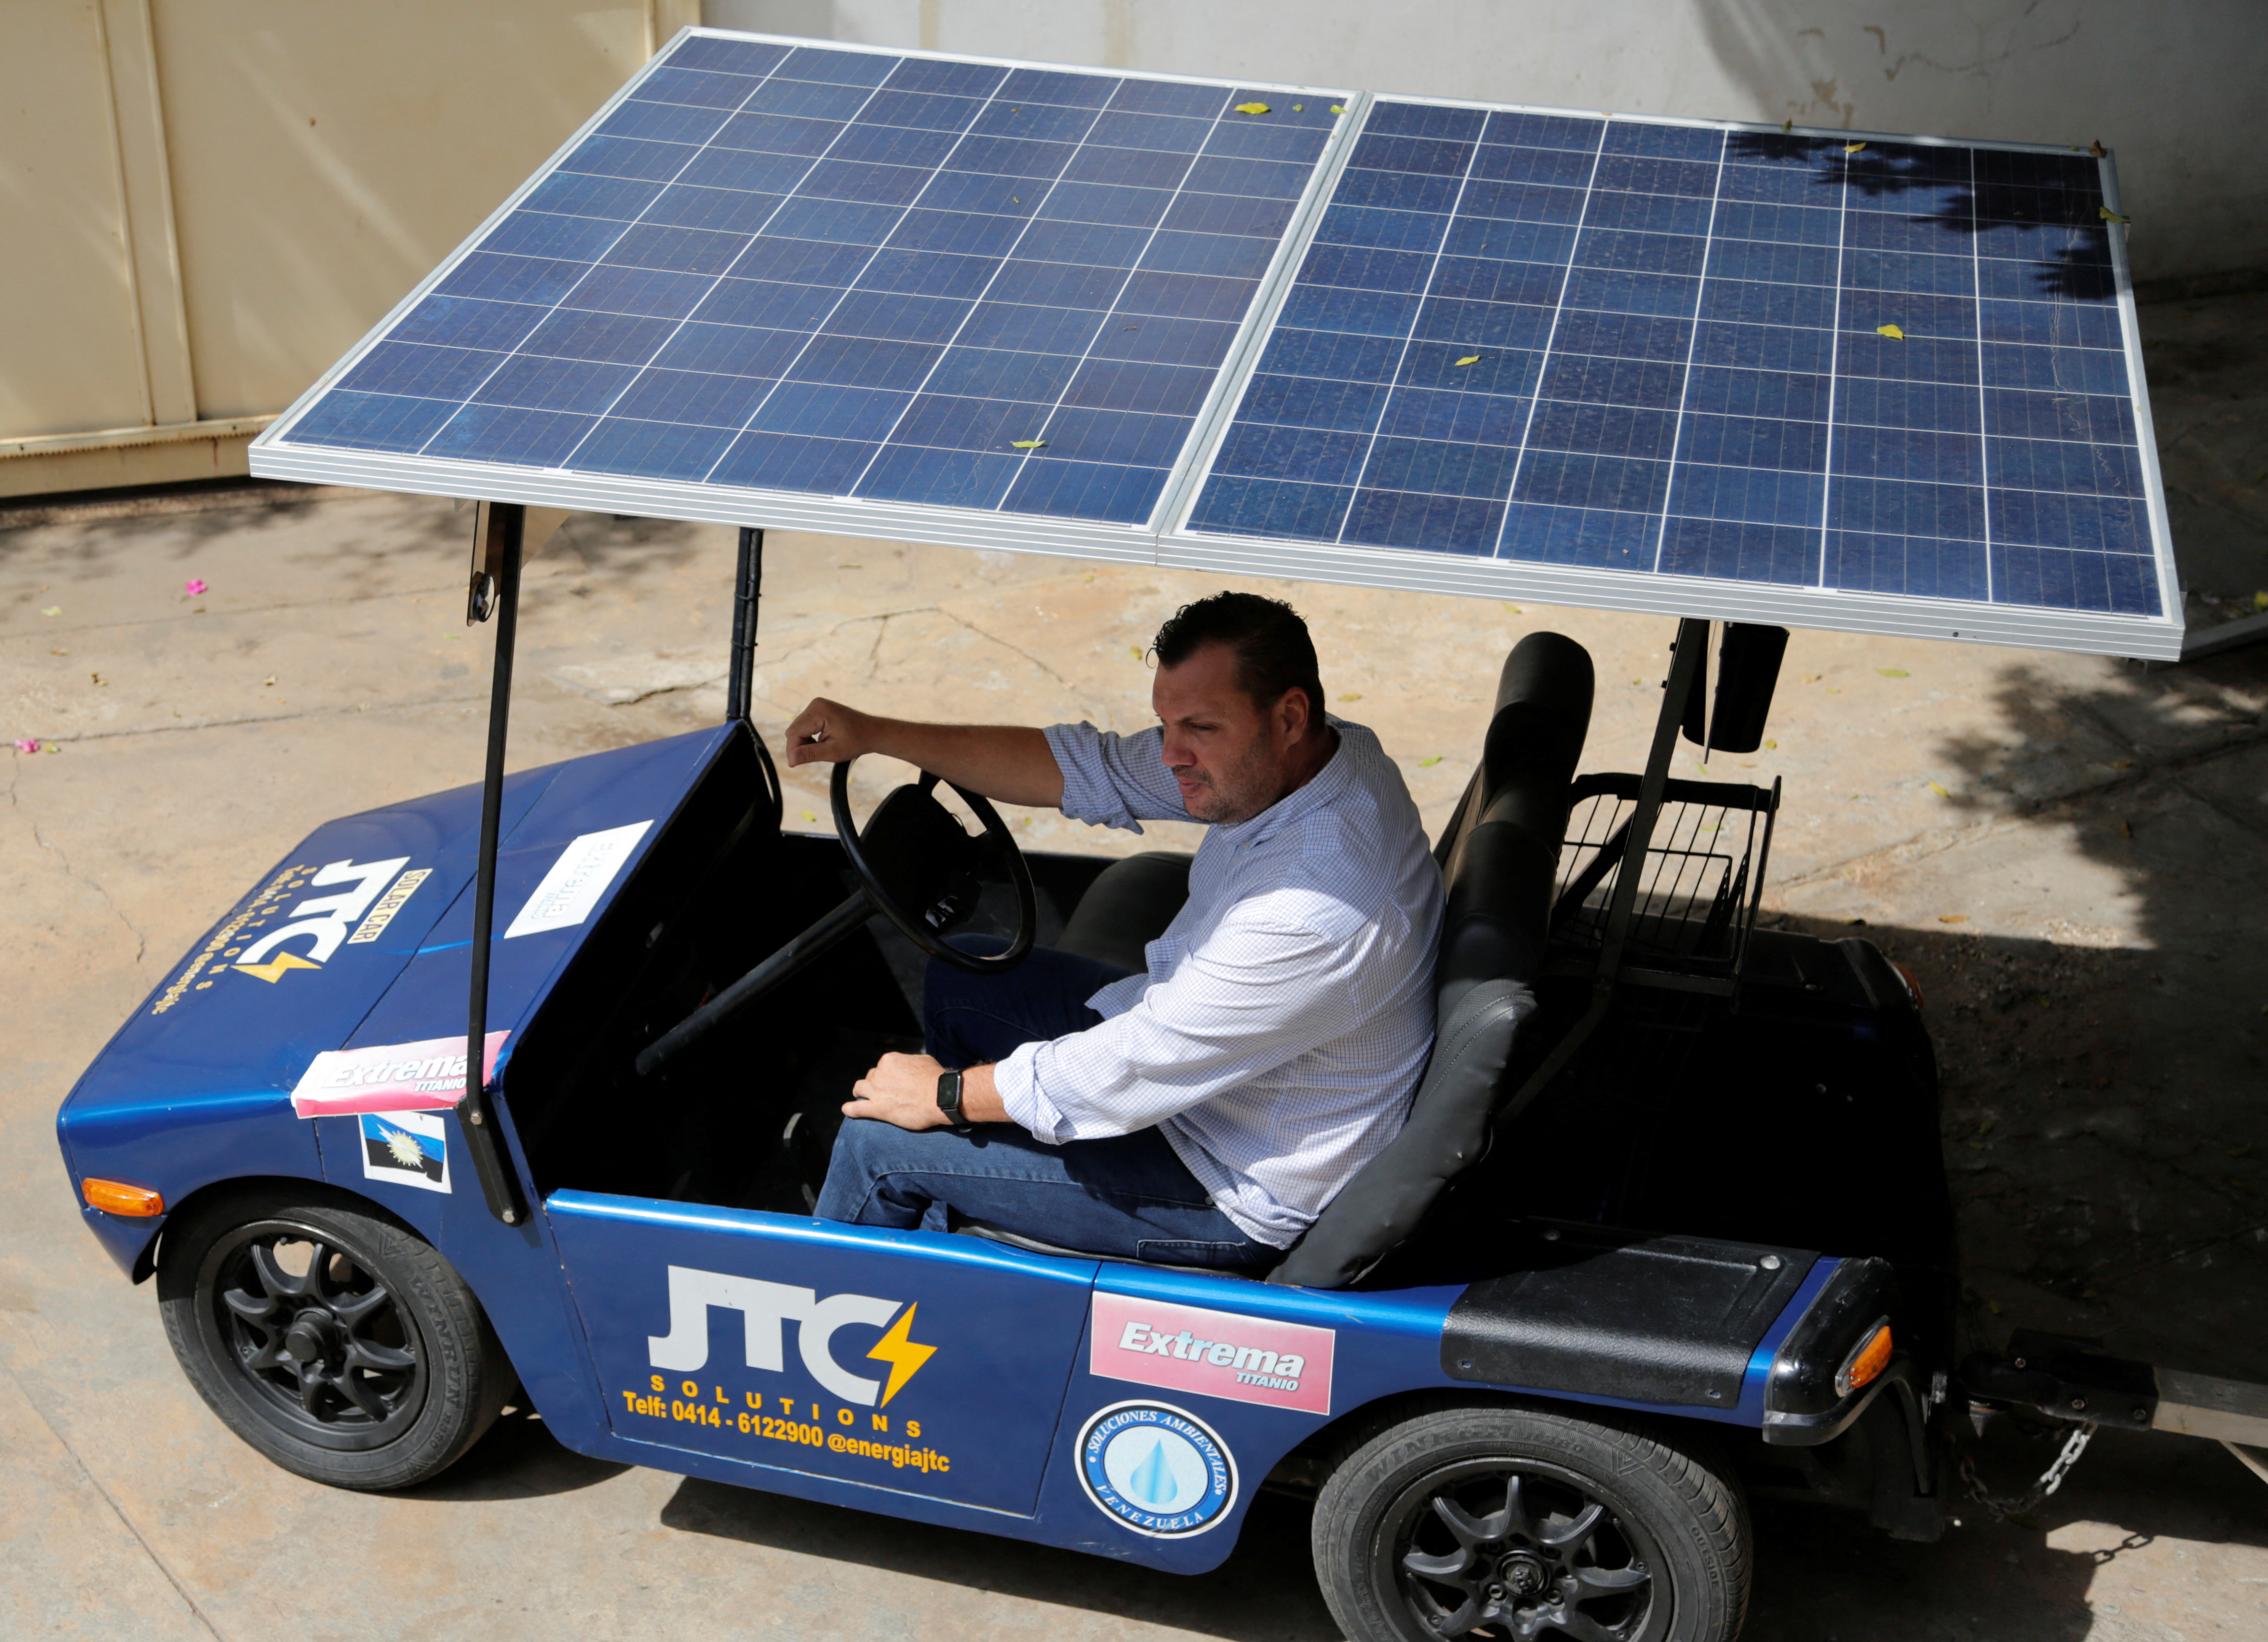 In Venezuelan oil town, solar-powered car offers escape from fuel lines